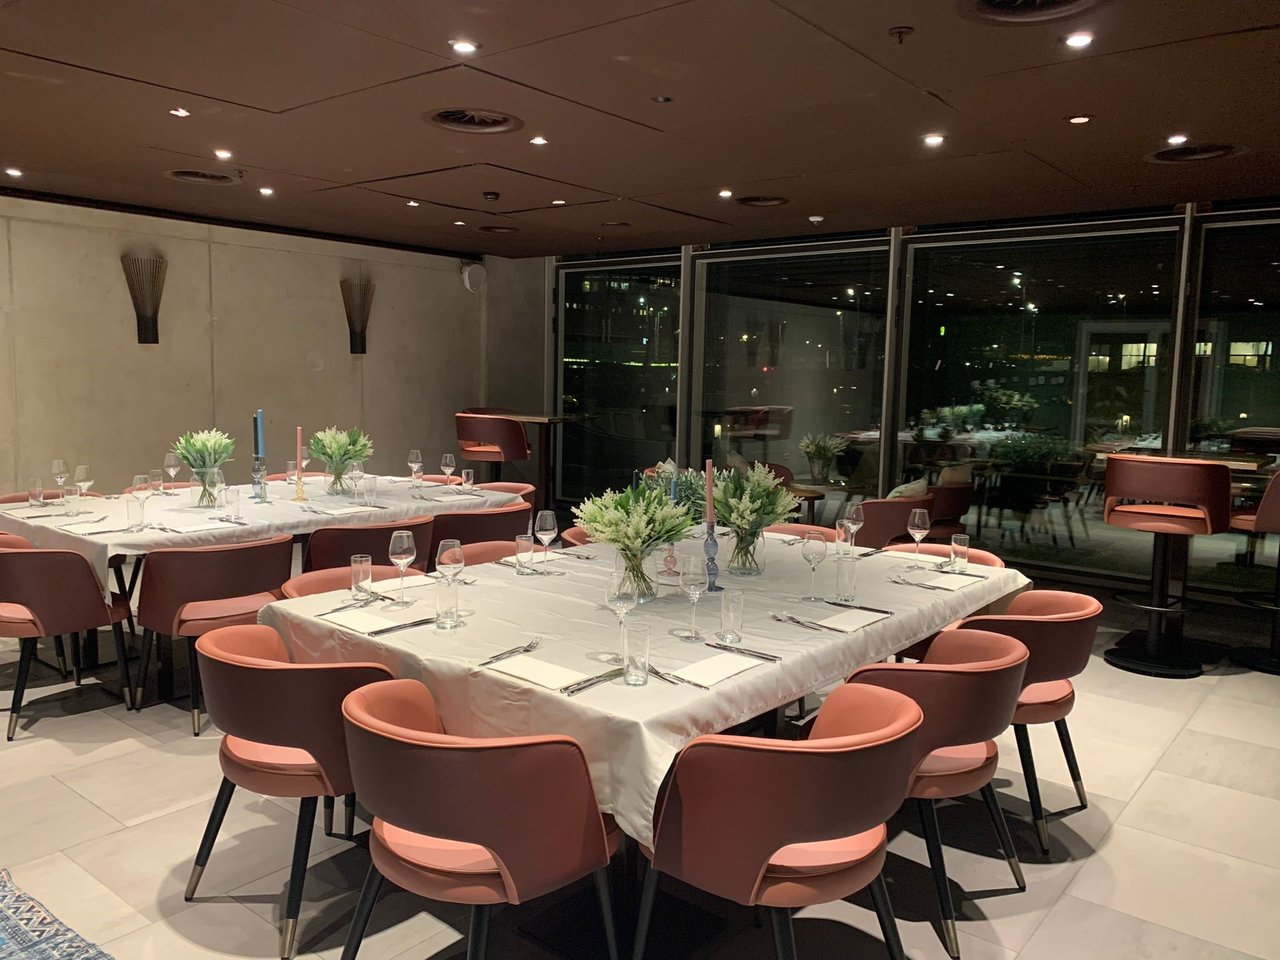 Private Dining Room at night